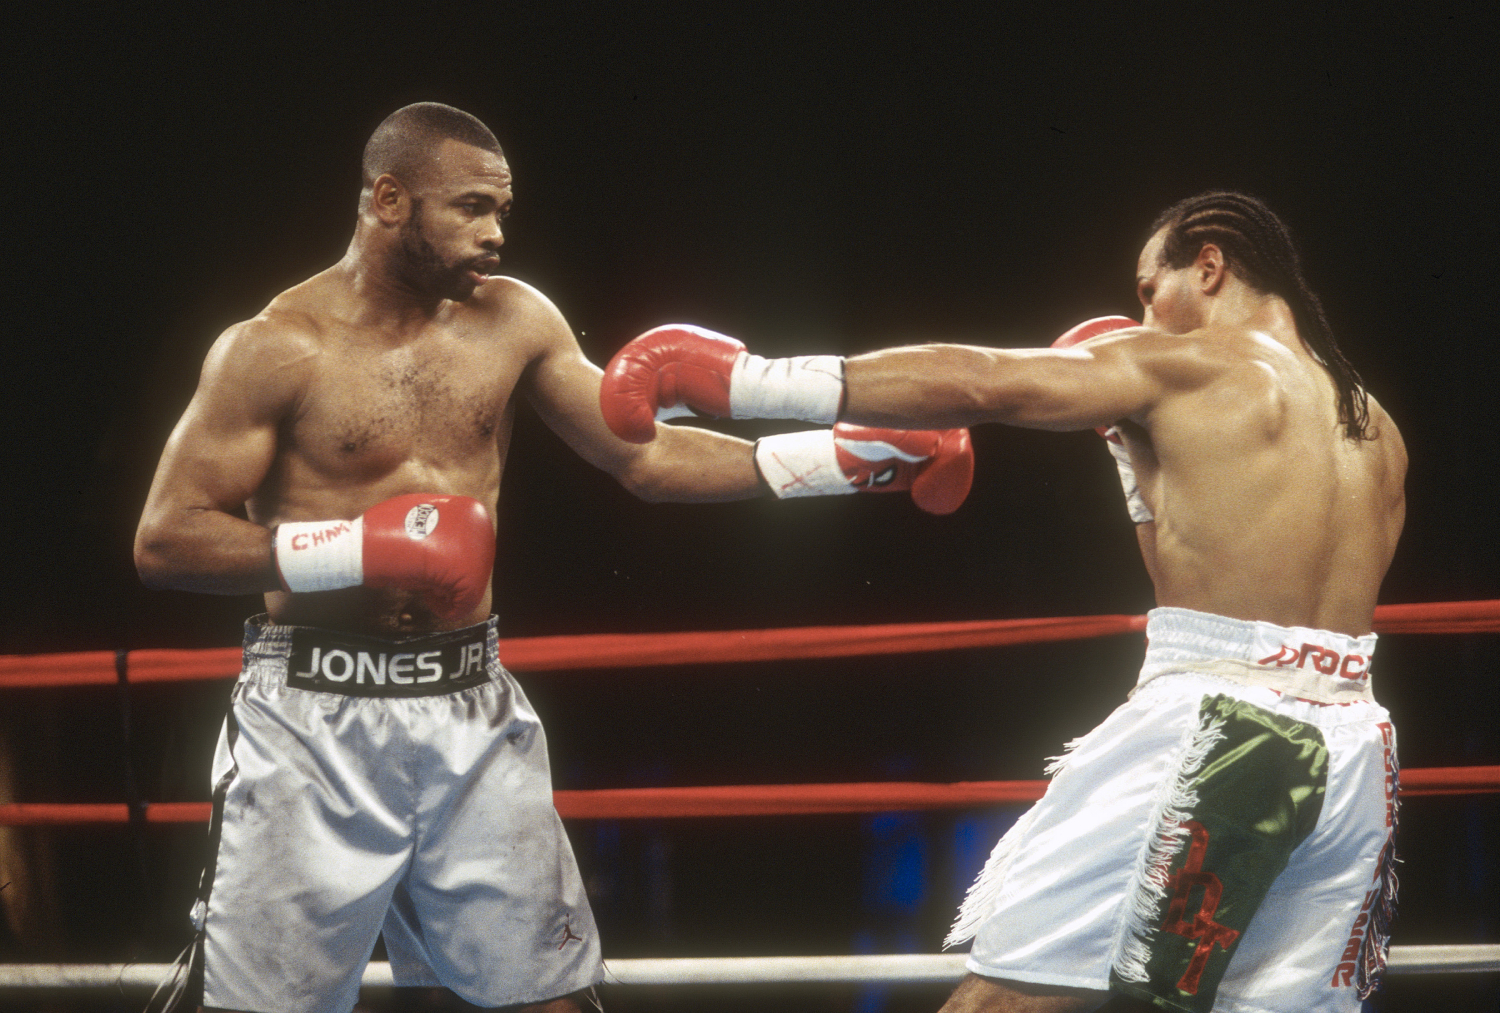 Roy Jones Jr. says Mike Tyson could compete for the heavyweight title today at age 54.